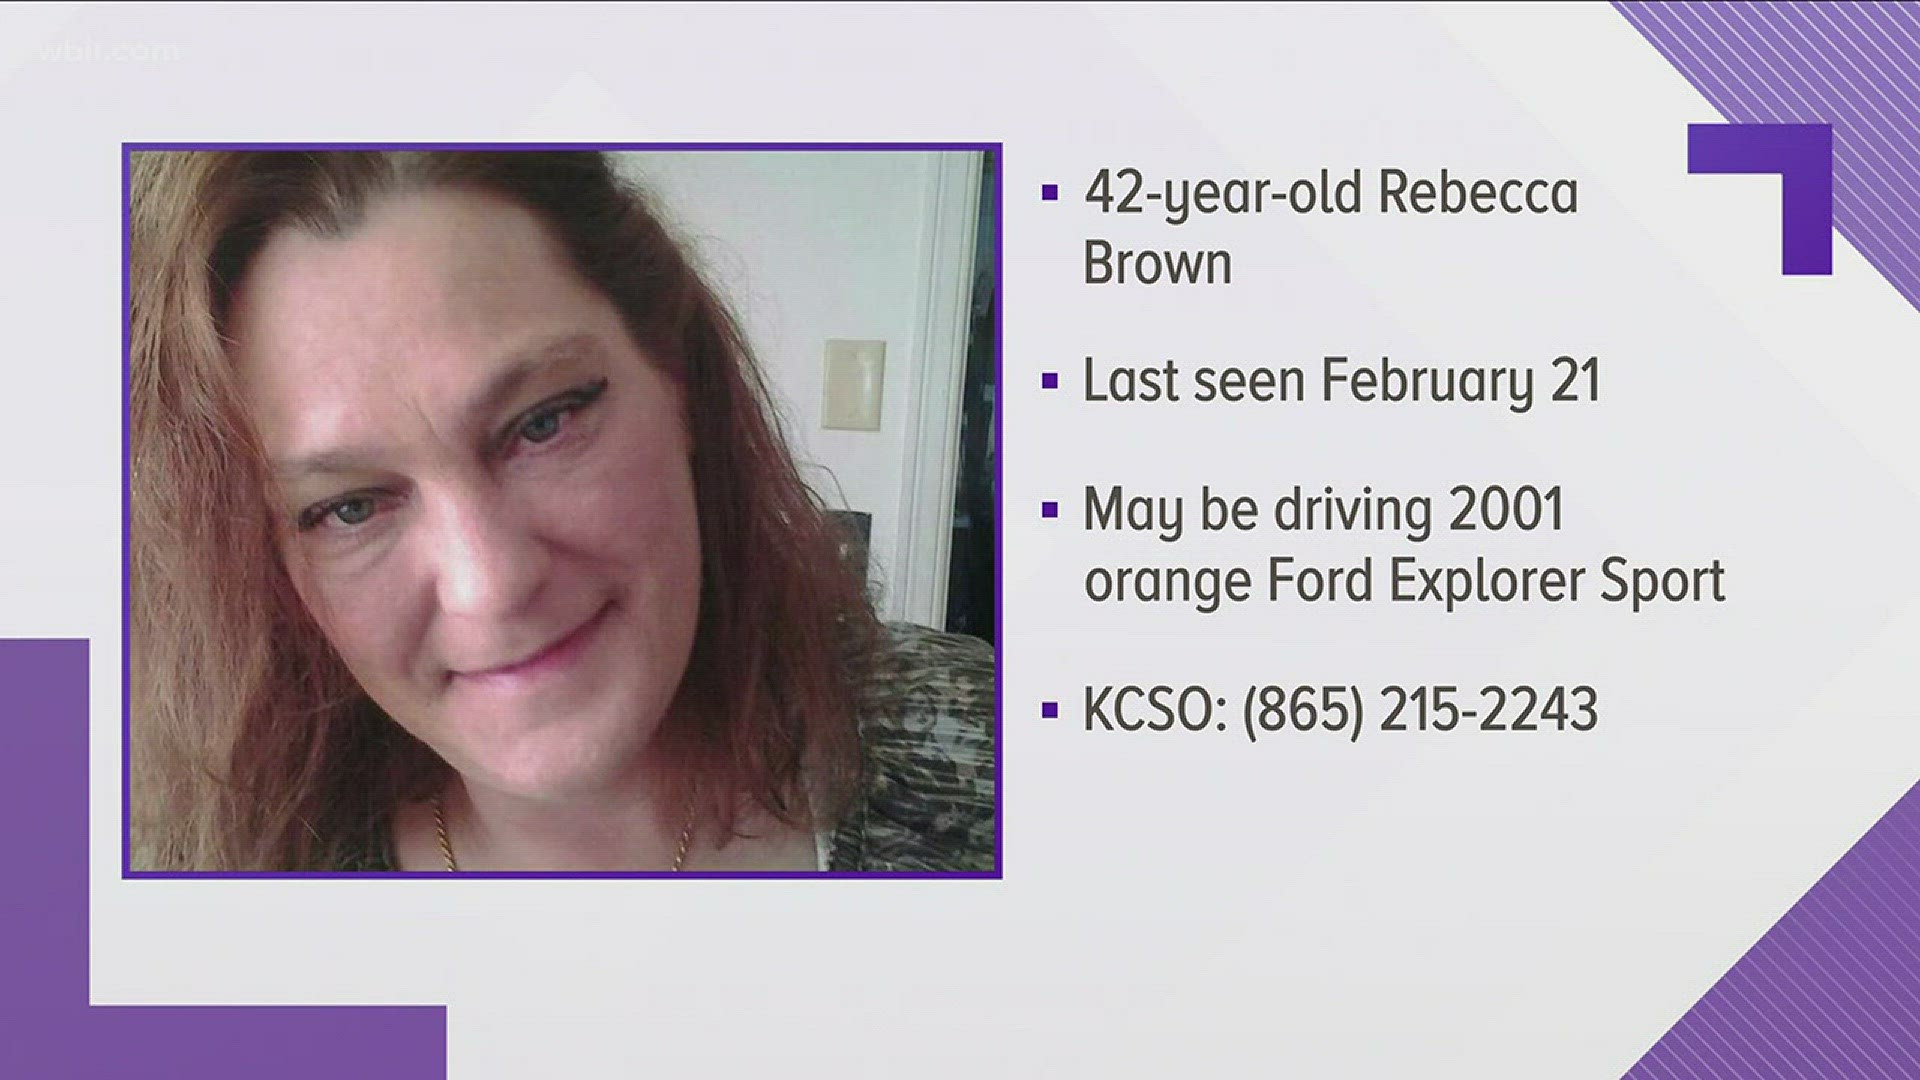 The Knox County Sheriff's Office is searching for a missing 42-year-old woman.